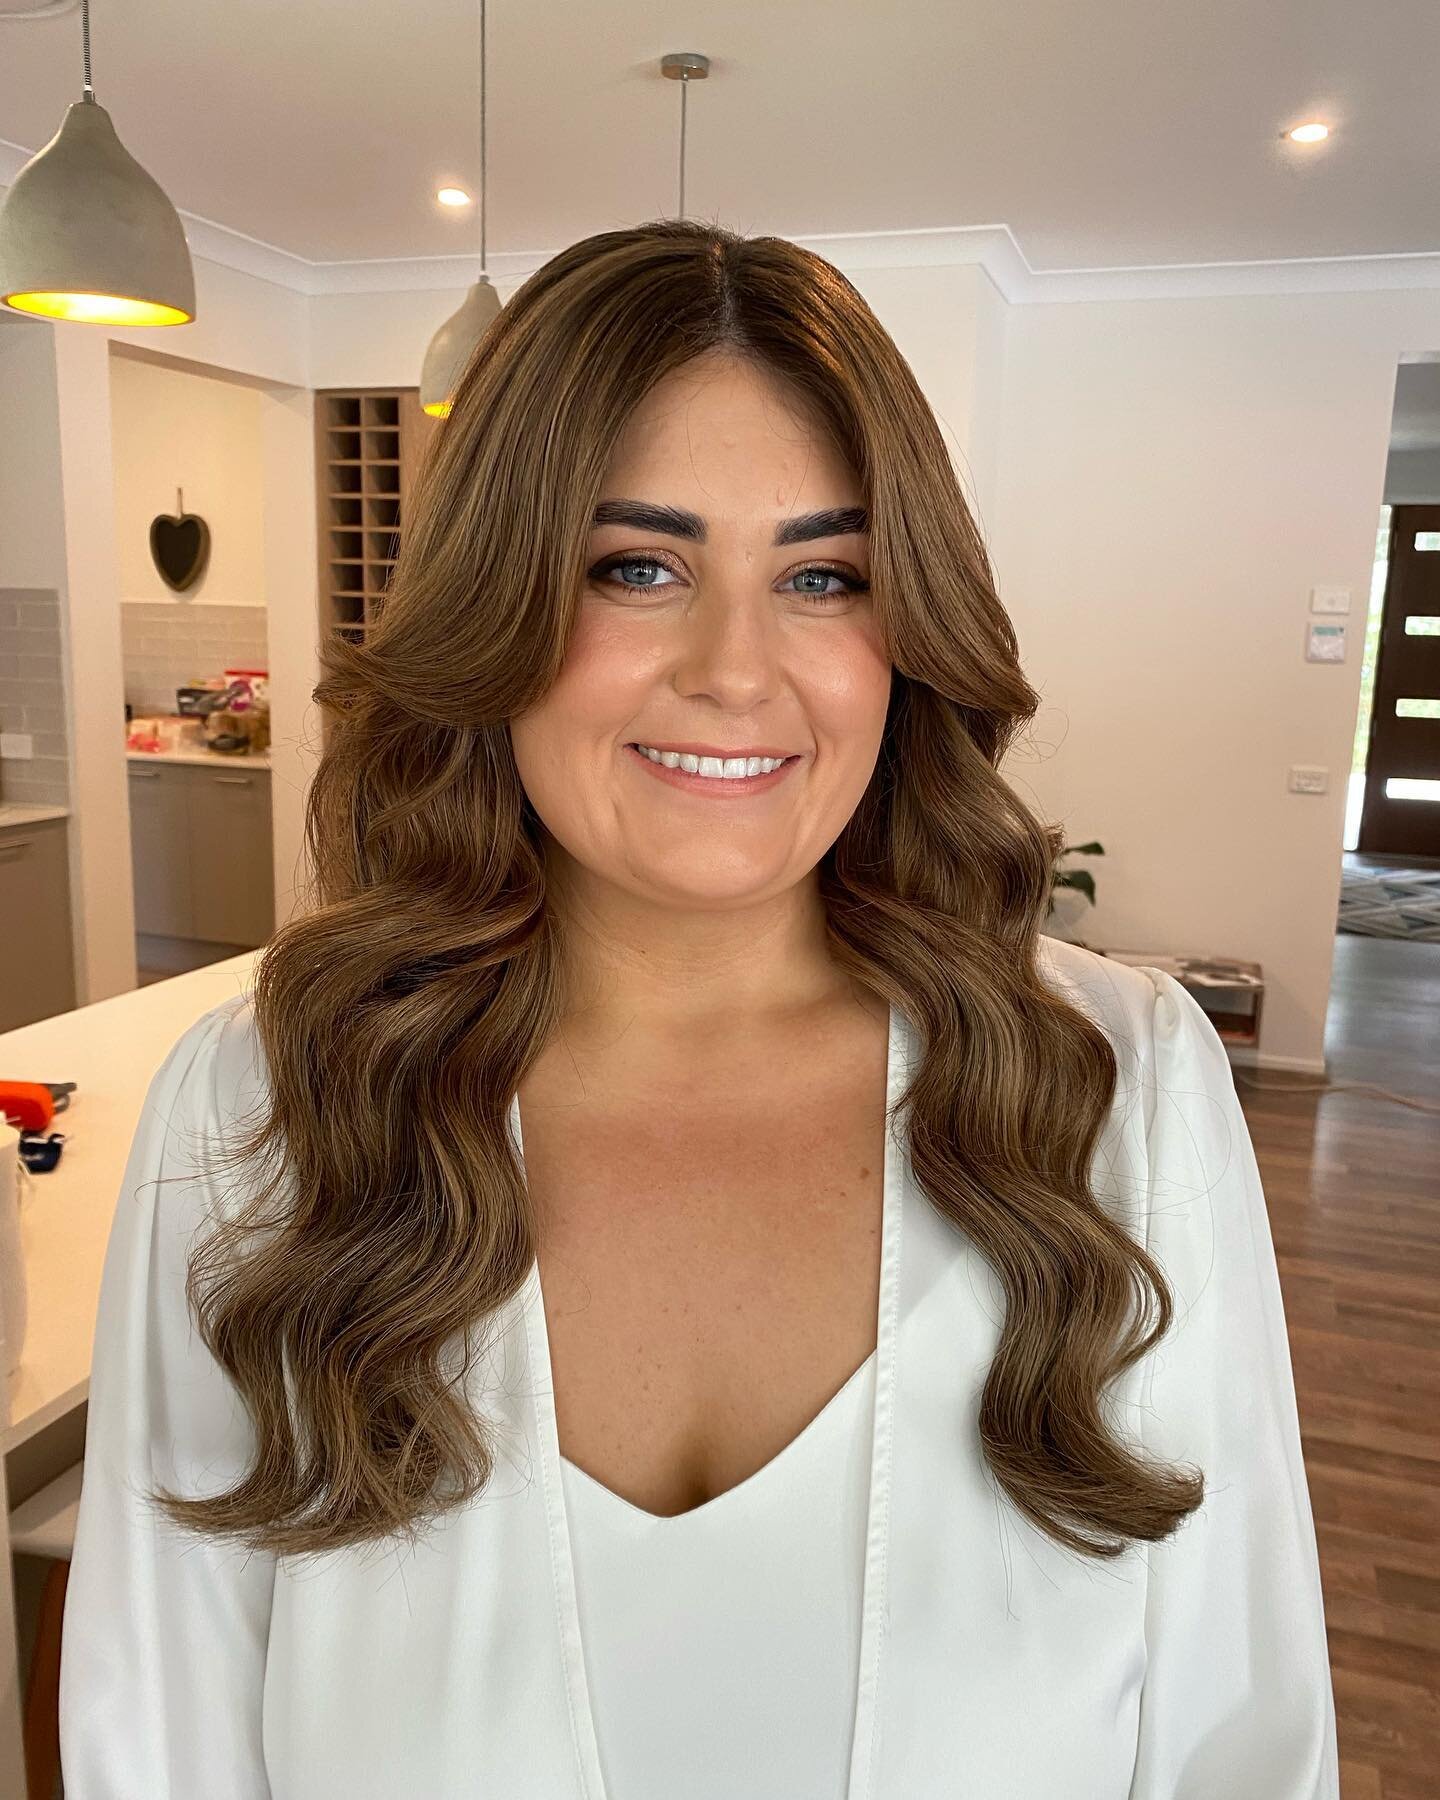 When my brides are calm, you know it&rsquo;s going to be a good morning! 

At Britteney&rsquo;s trial, we didn&rsquo;t have any extensions to work with so we REALLY had to vision how it&rsquo;ll look on the day. As a professional hairstylist, I can v